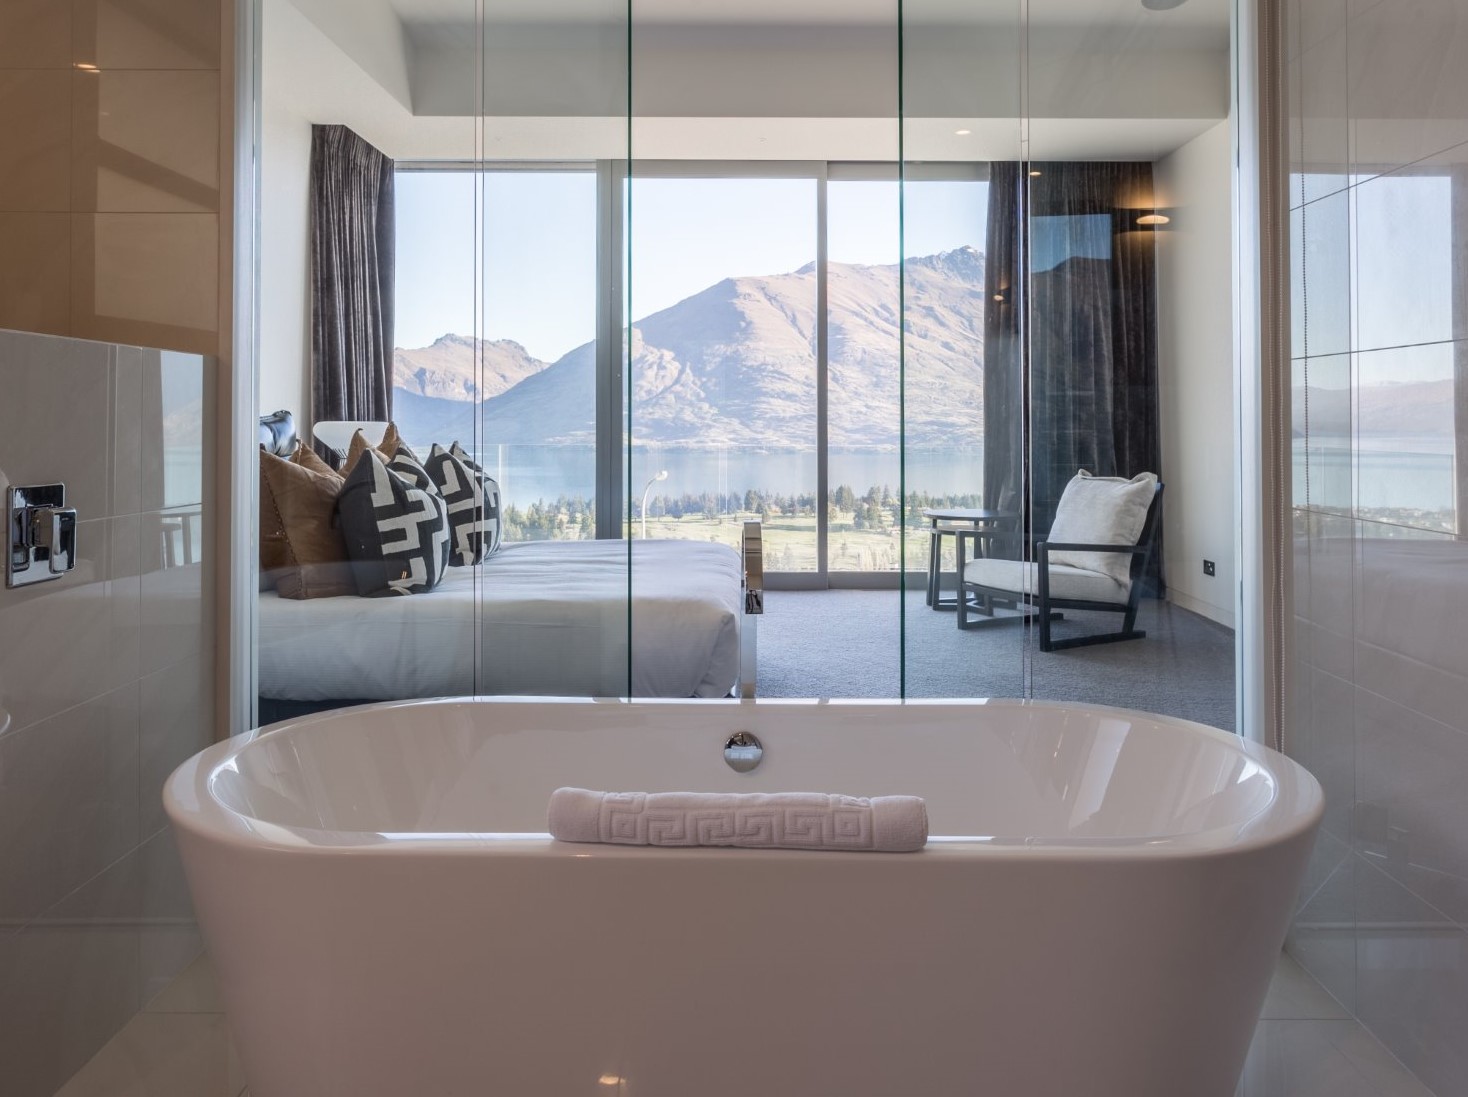 Bathroom with a view of Lake Wakatipu. Property Name, Views on Edinburgh presented by Relax it's Done Luxury Property Management.